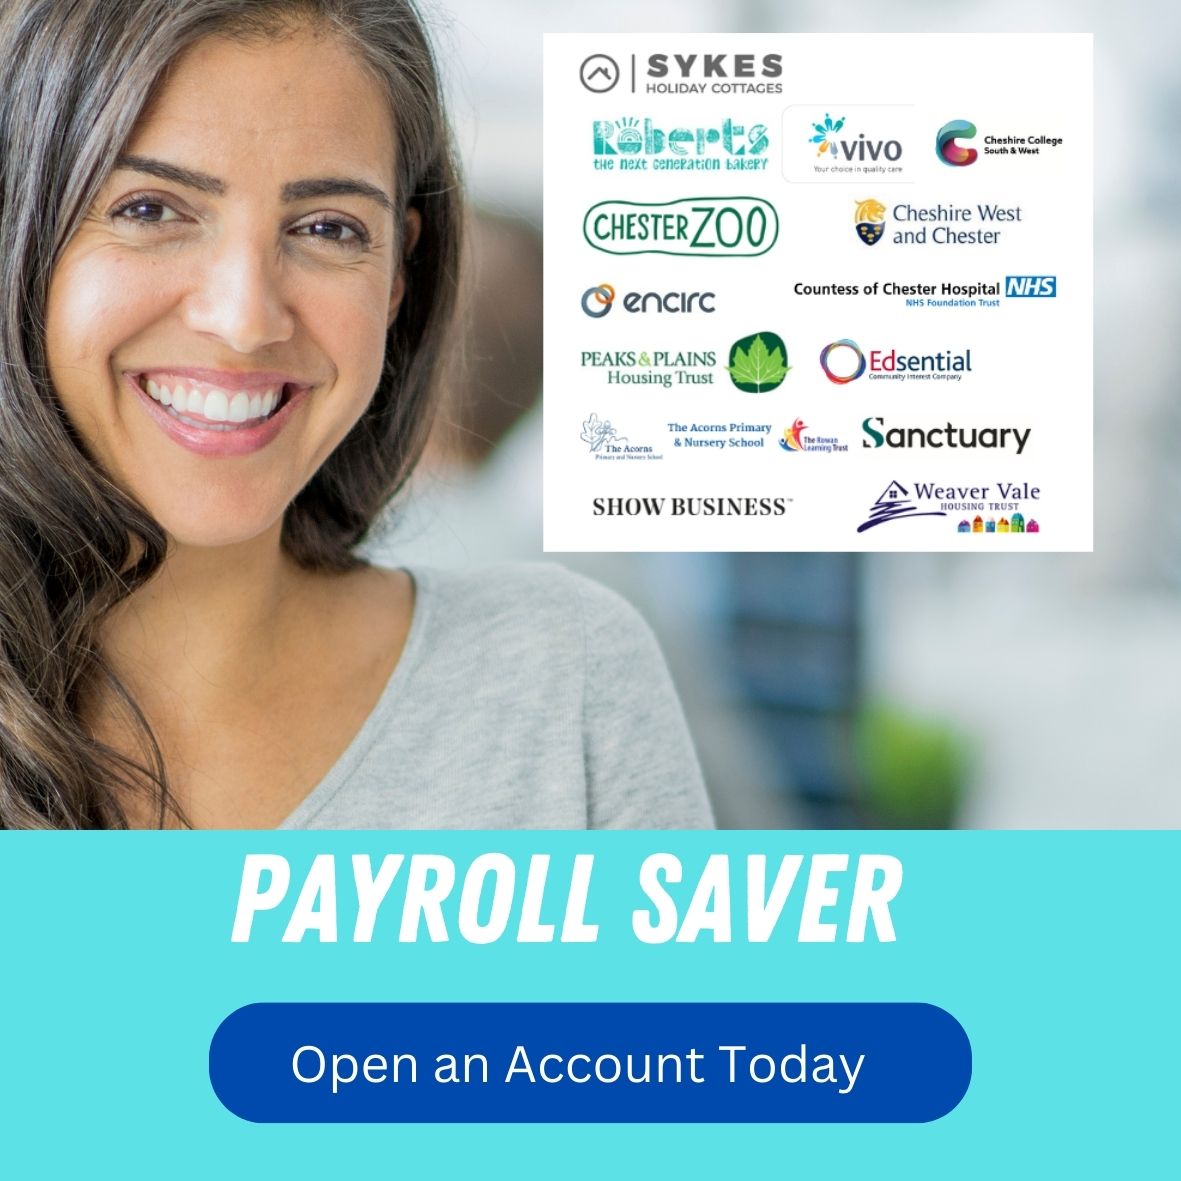 Payroll Saver
The hassle free way to save directly from your salary.